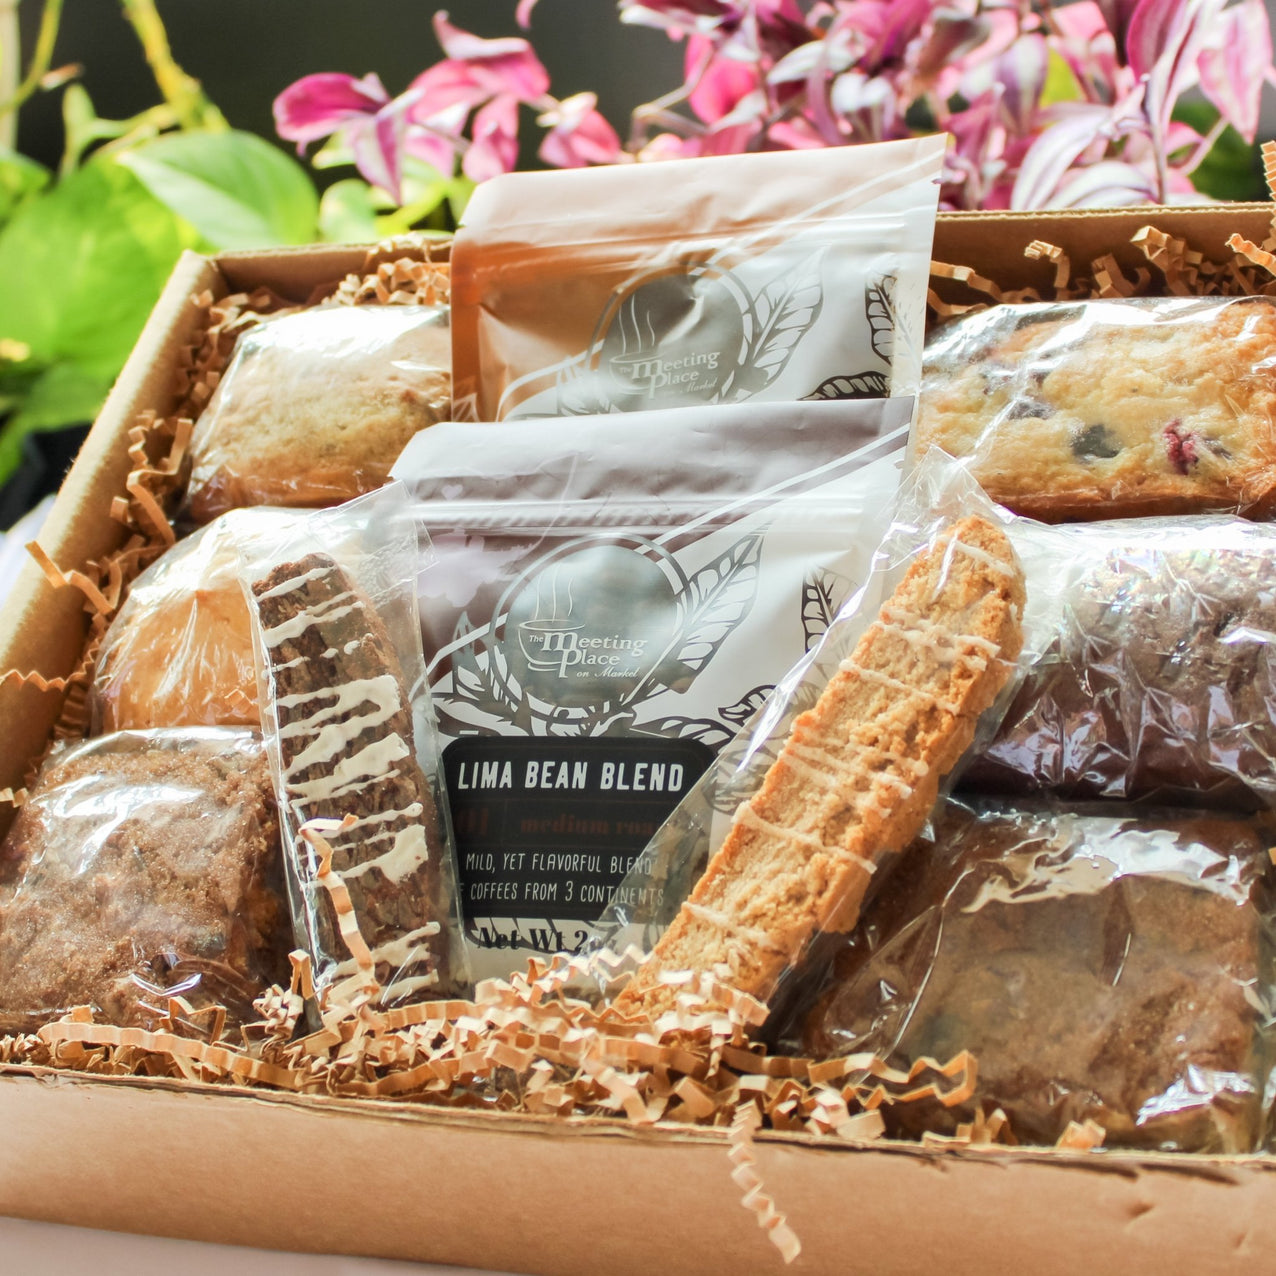 Sympathy Gift Basket with Breakfast Baked Goods Food Gift Baskets - The Meeting Place on Market